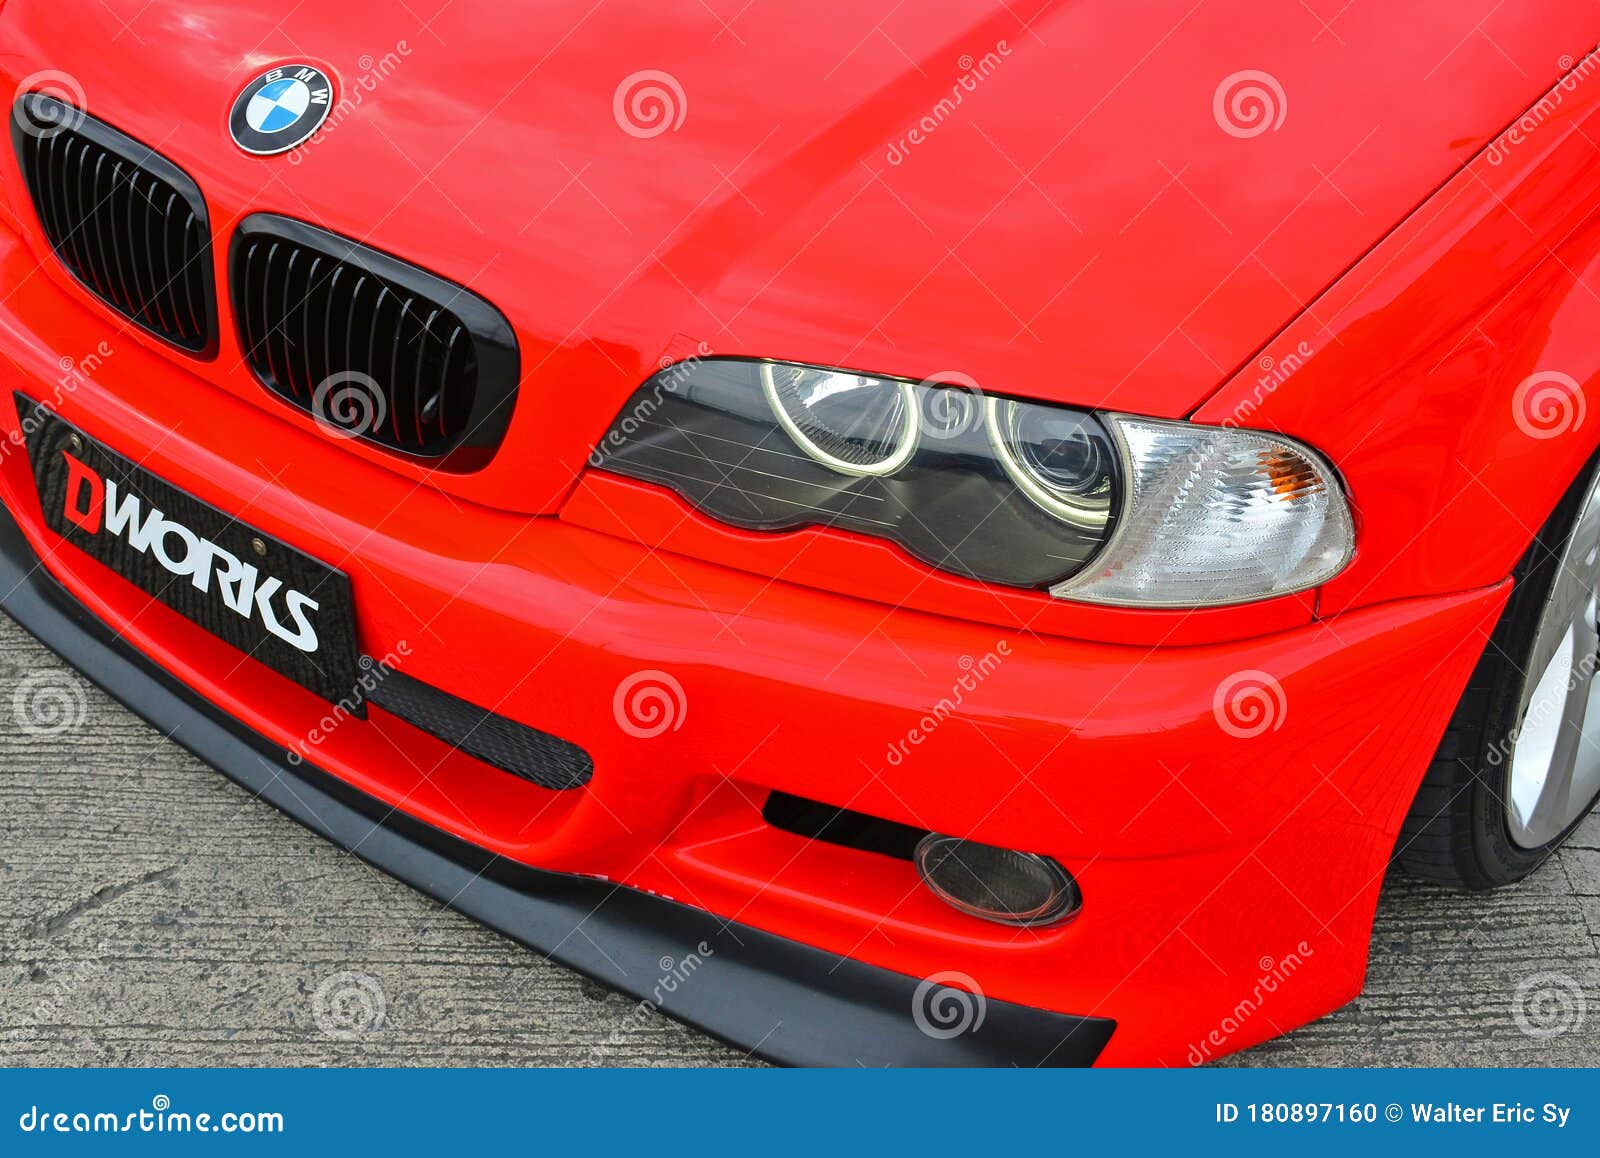 Bmw Red Car At Royals Auto Moto Show In Marikina Philippines Editorial Image Image Of Automobile Aftermarket